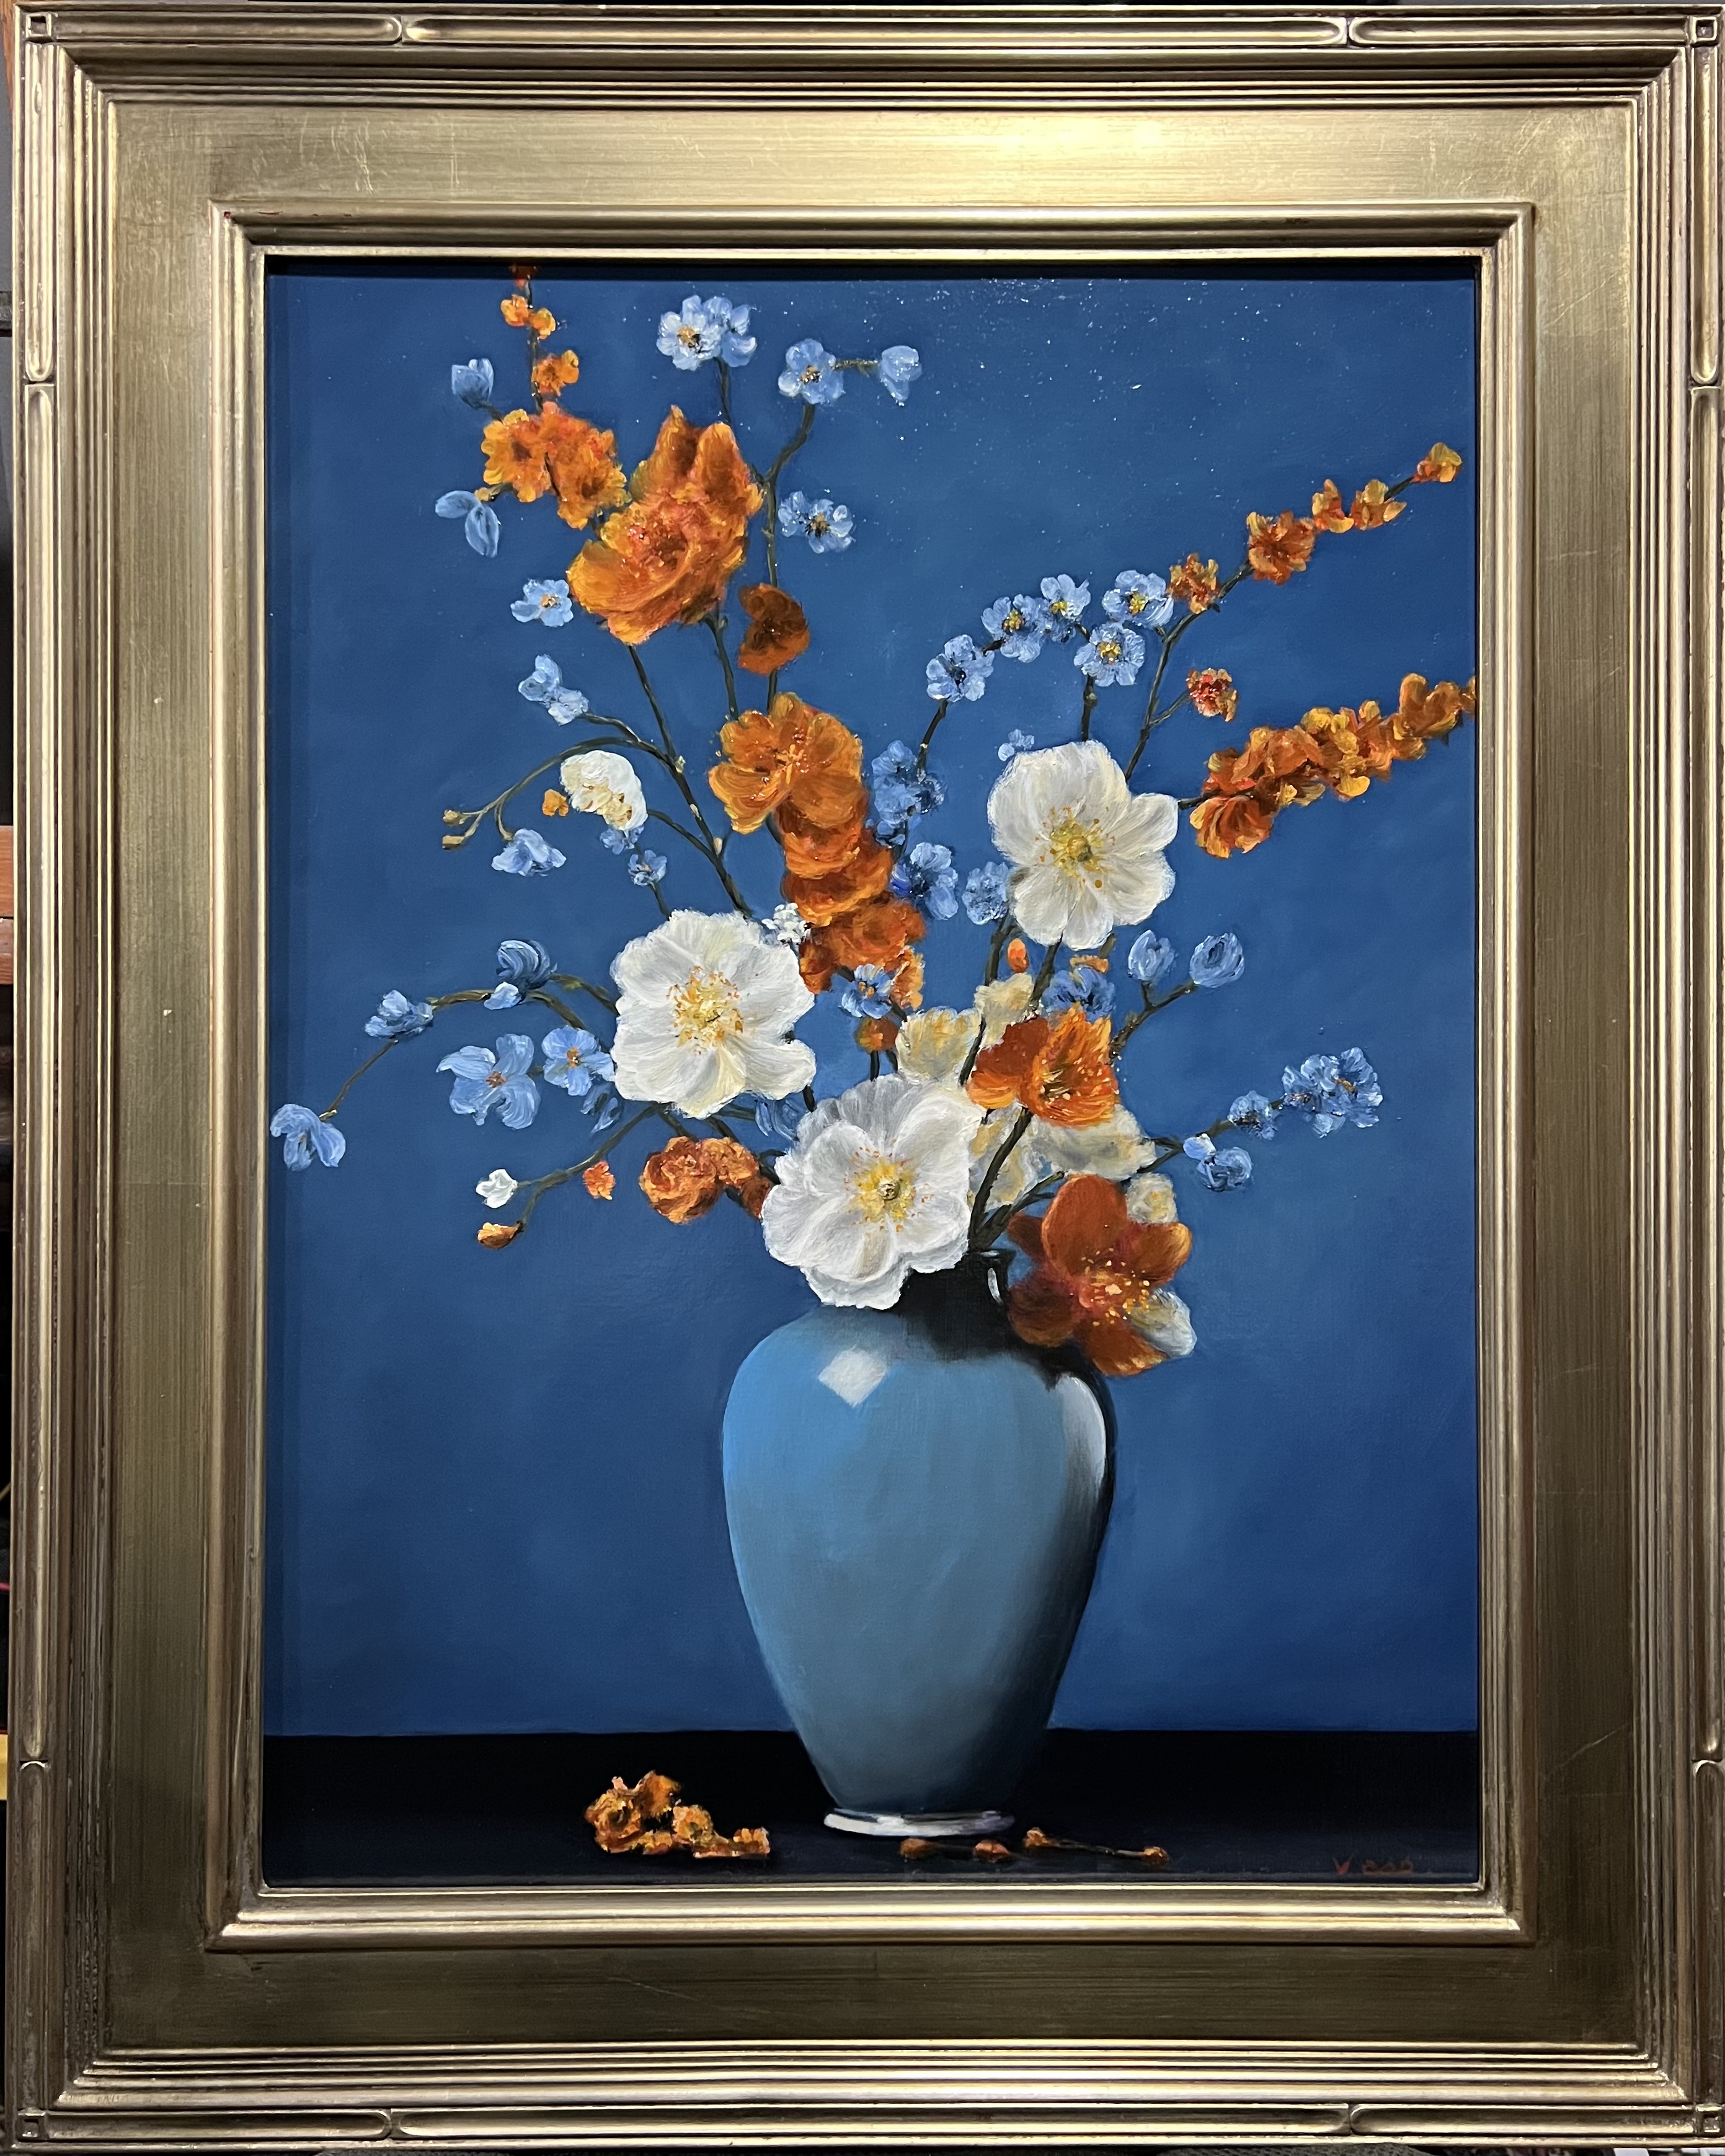 Blossom Dreams 24x18 $1500 at Hunter Wolff Gallery